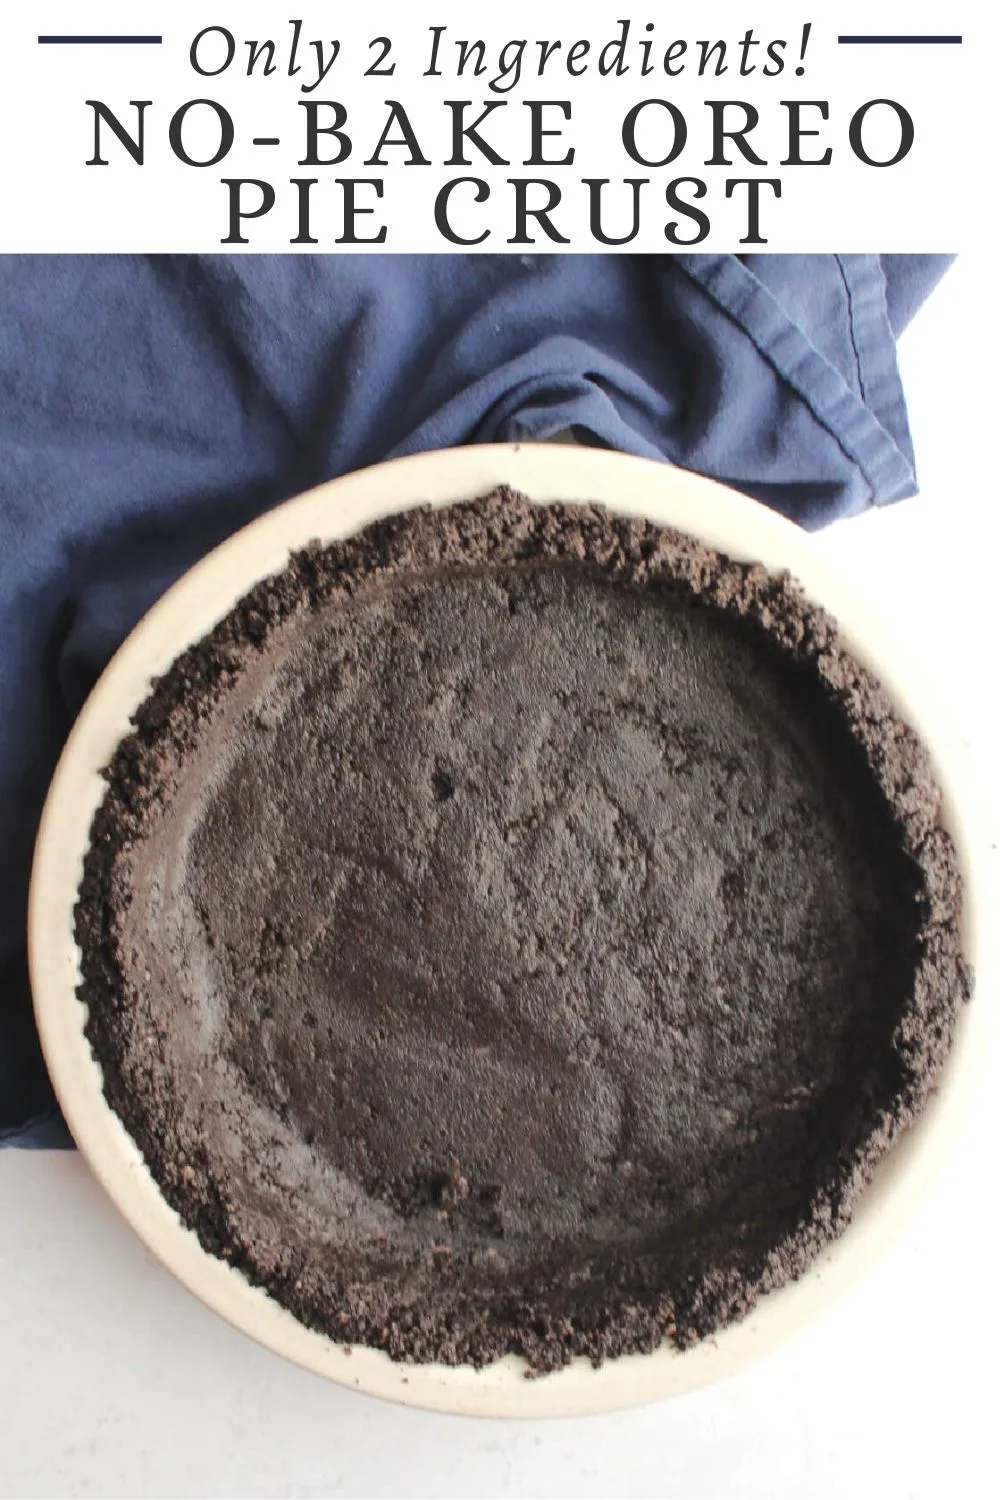 Make a no-bake Oreo pie crust with just 2 ingredients. This recipe allows you to get a tasty chocolate crust without even having to turn on the oven.